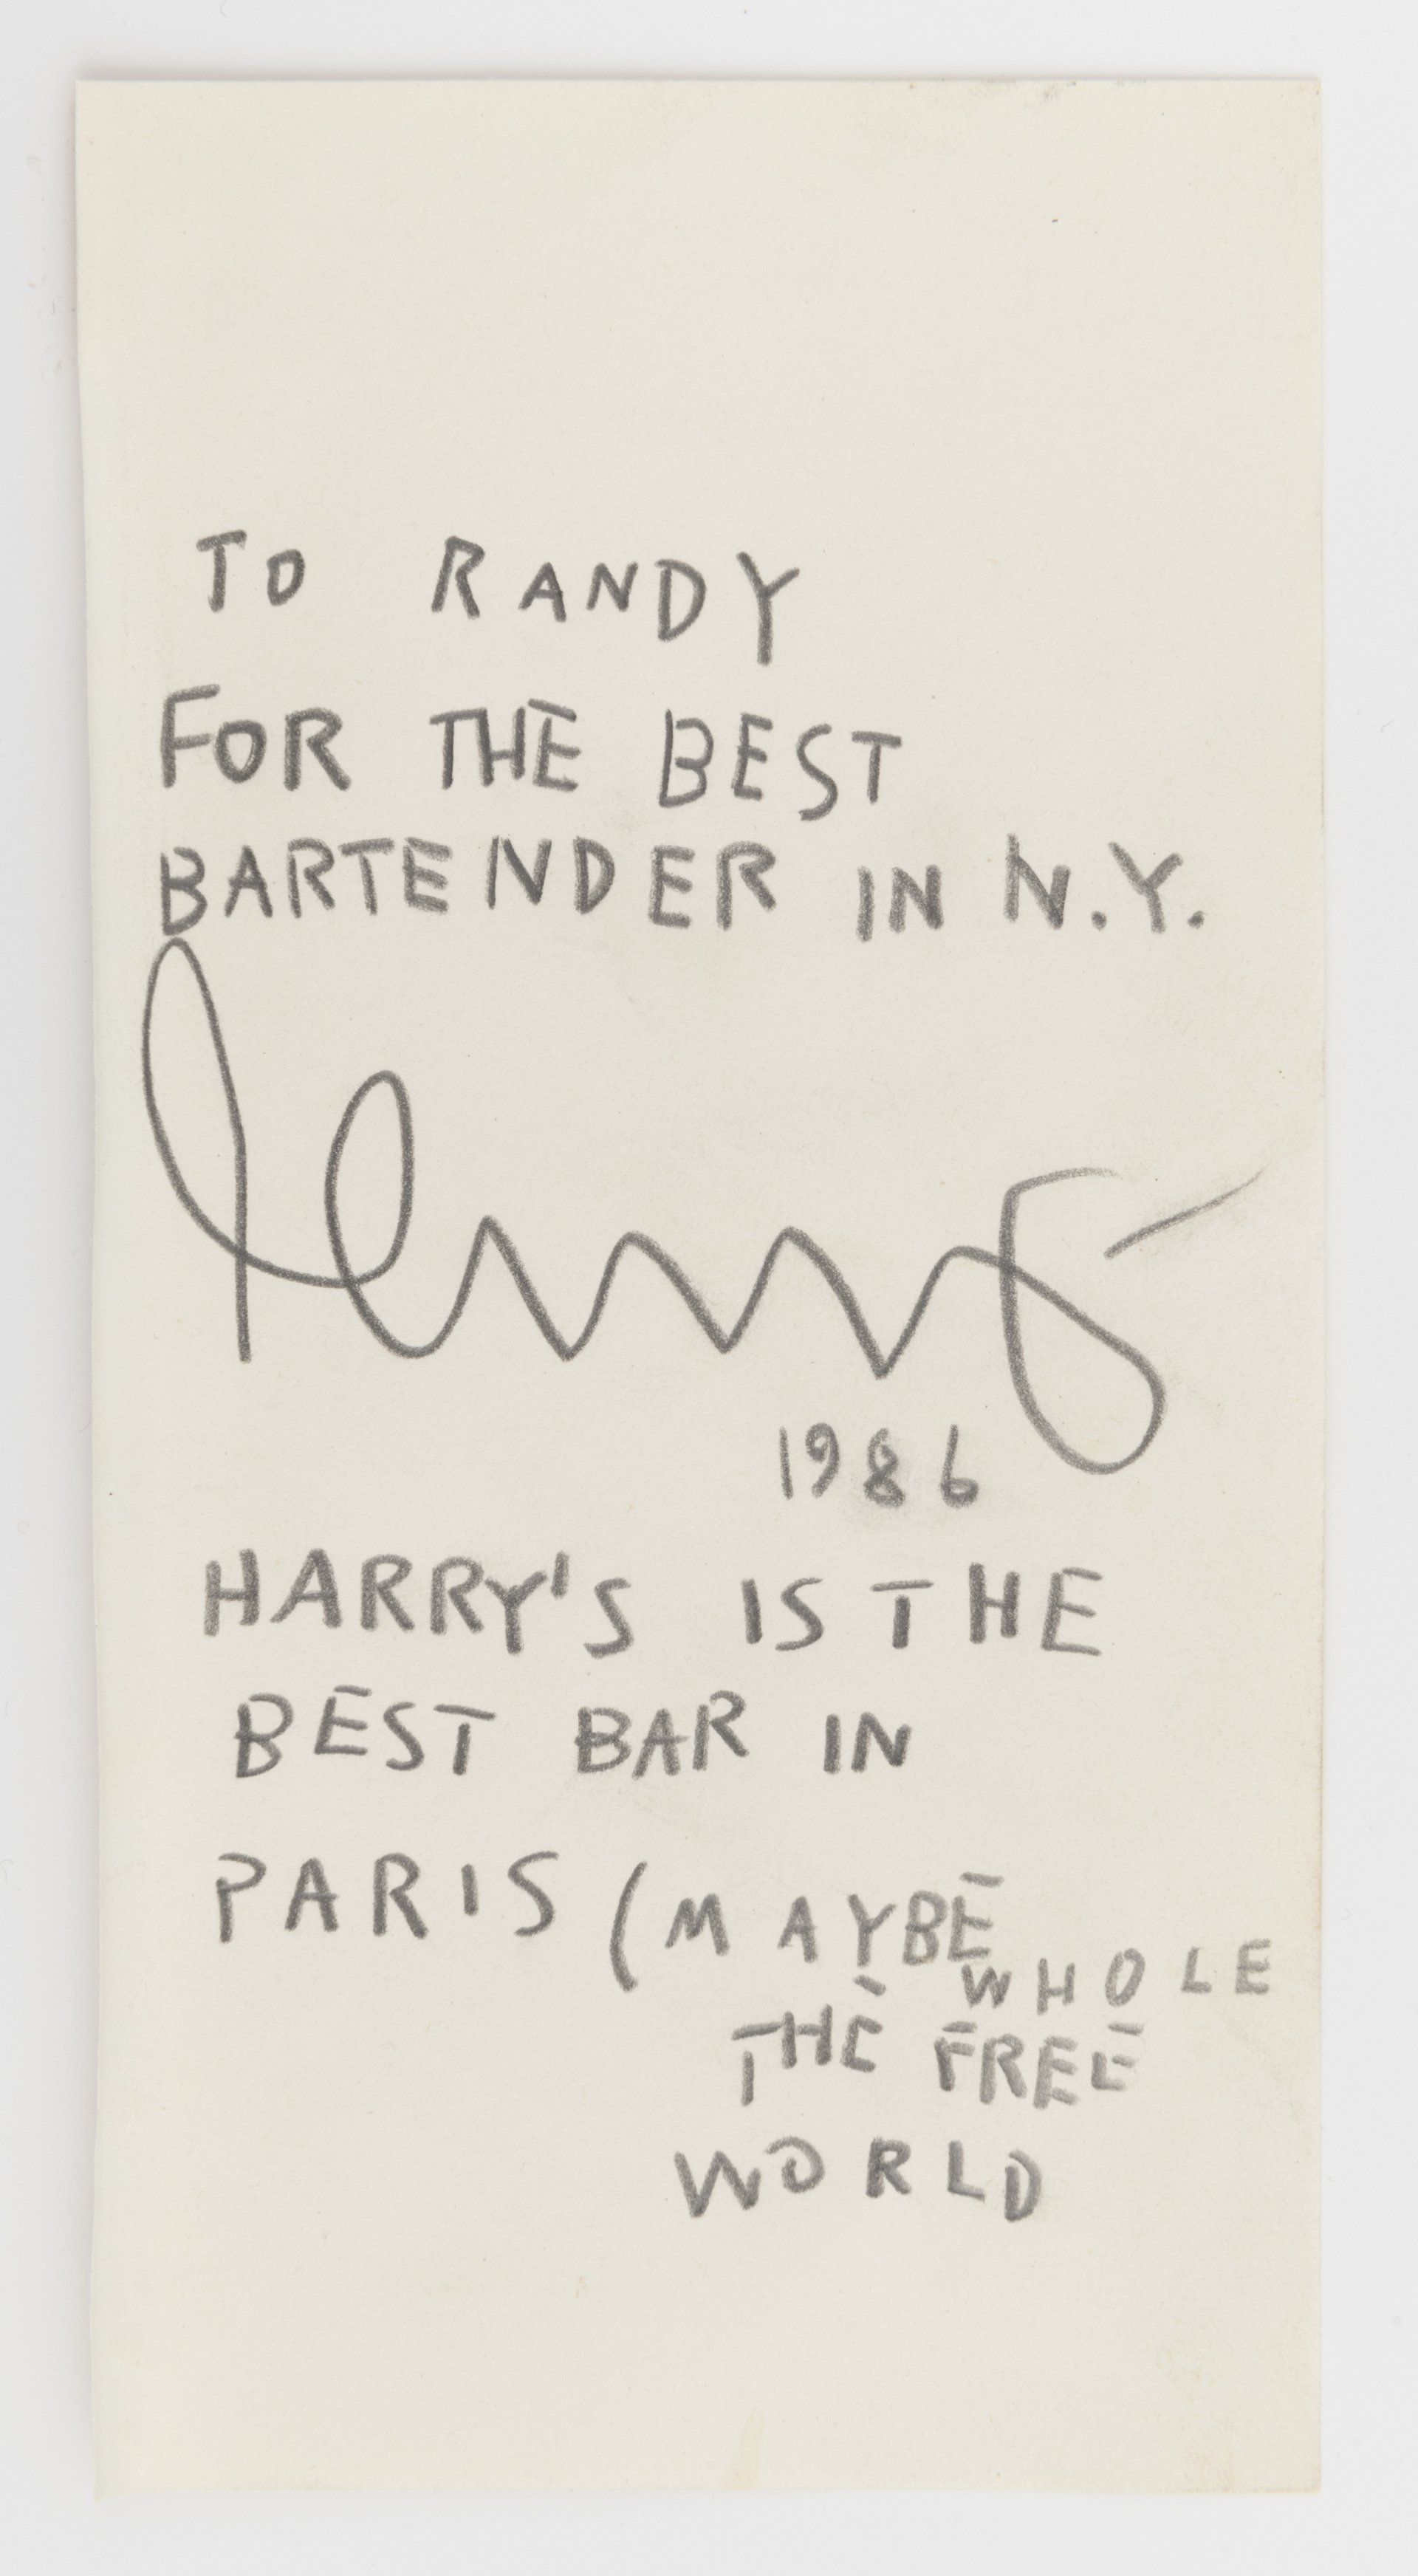 Jean-Michel Basquiat,Untitled (Harry’s ABC of Mixing Cocktails), (1986). A gift from Jean-Michel Basquiat to bartender Randy Gunn. Photo courtesy of Janis Gardner Cecil Fine Art.